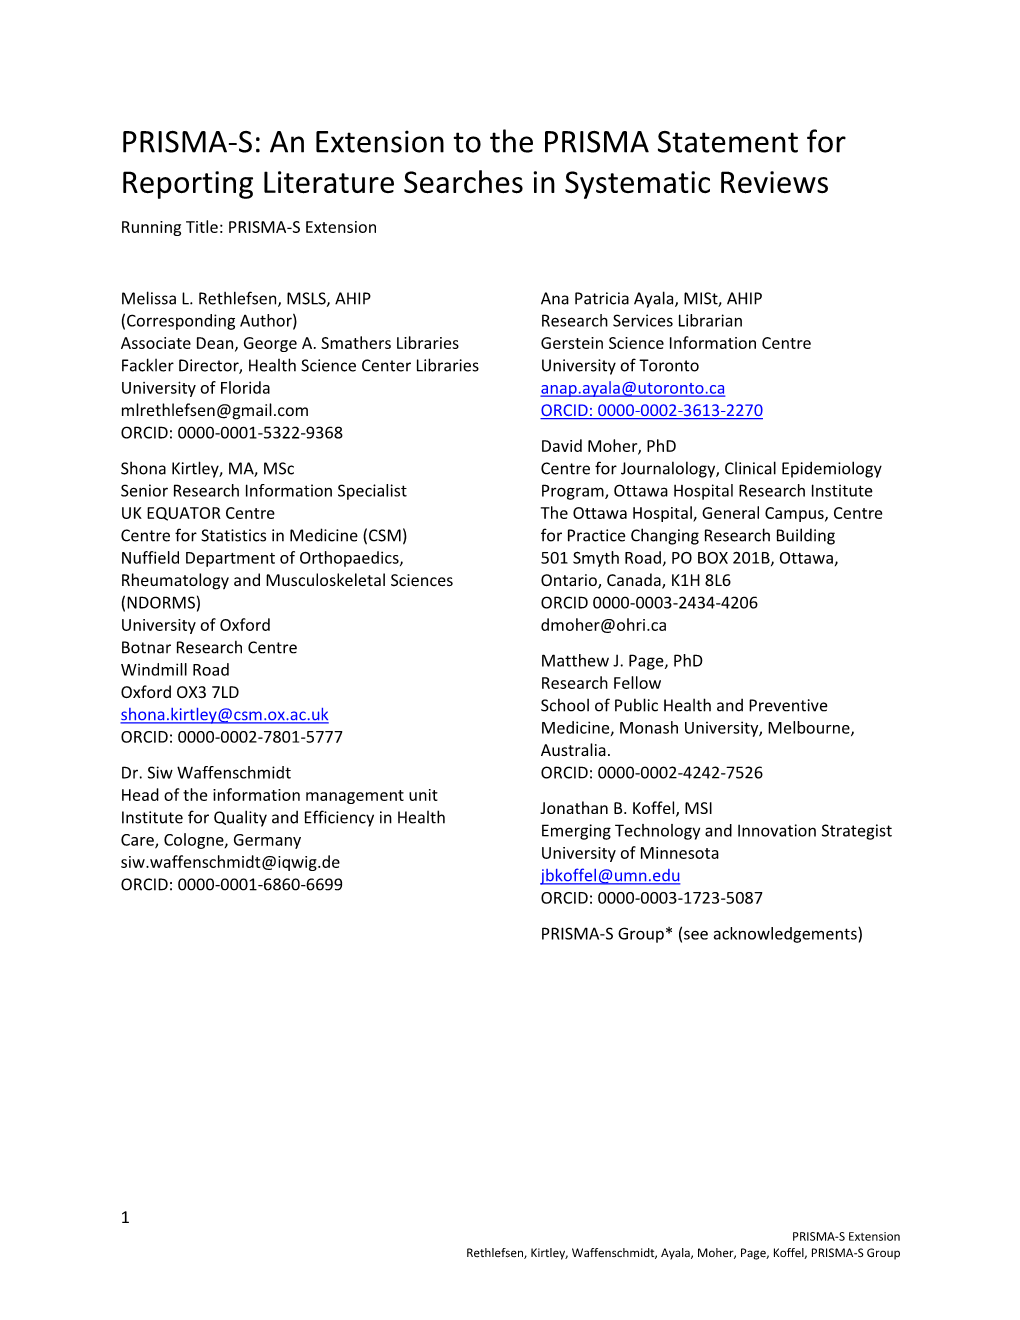 An Extension to the PRISMA Statement for Reporting Literature Searches in Systematic Reviews Running Title: PRISMA-S Extension